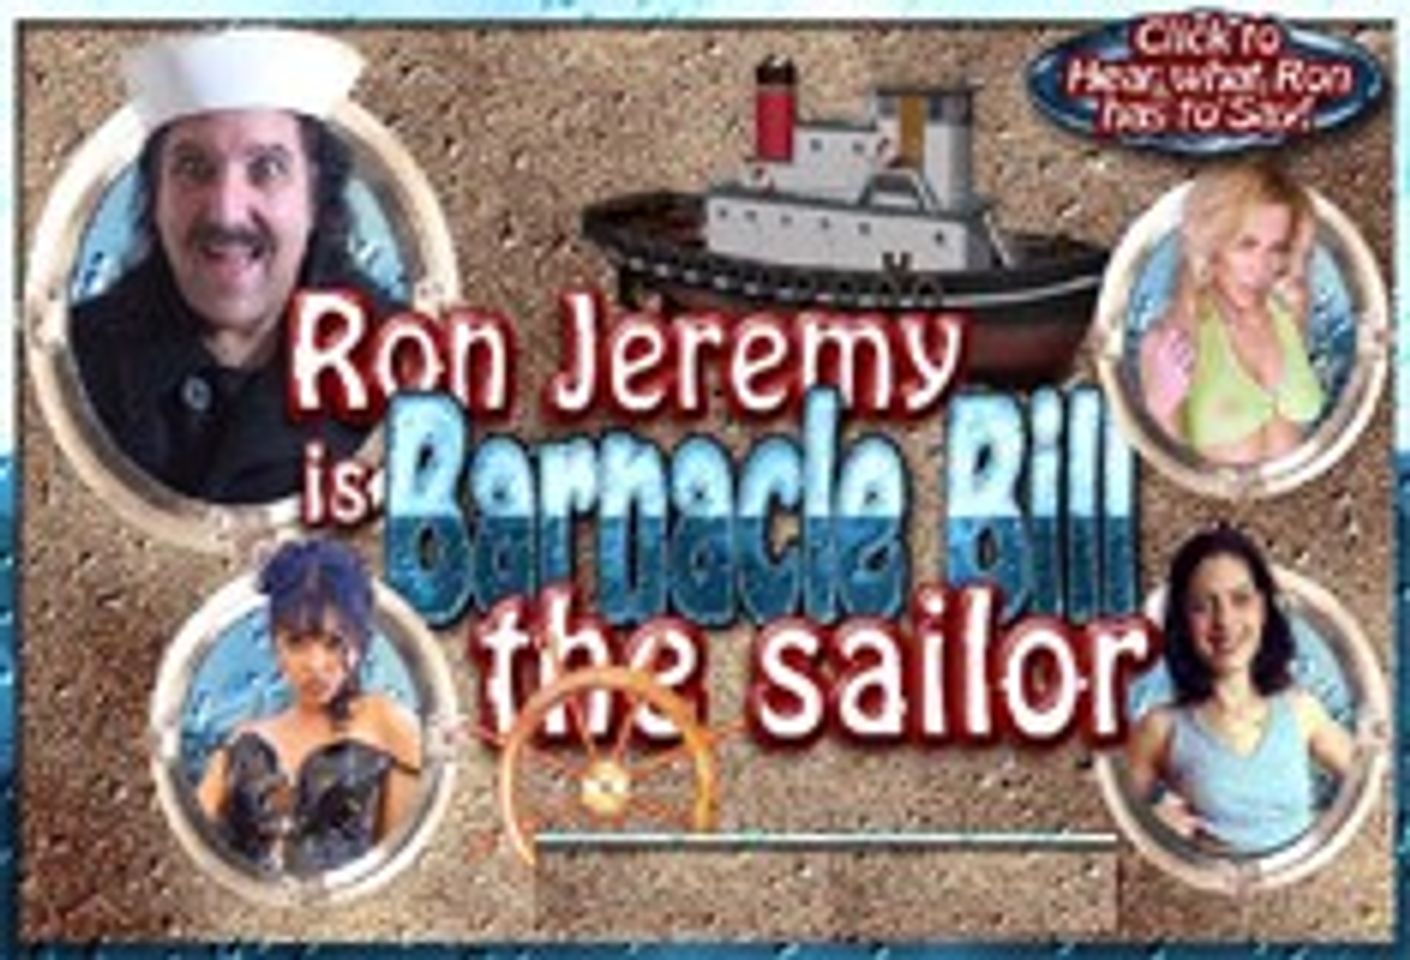 Barnacle Bill the Sailor Website Launches At Last